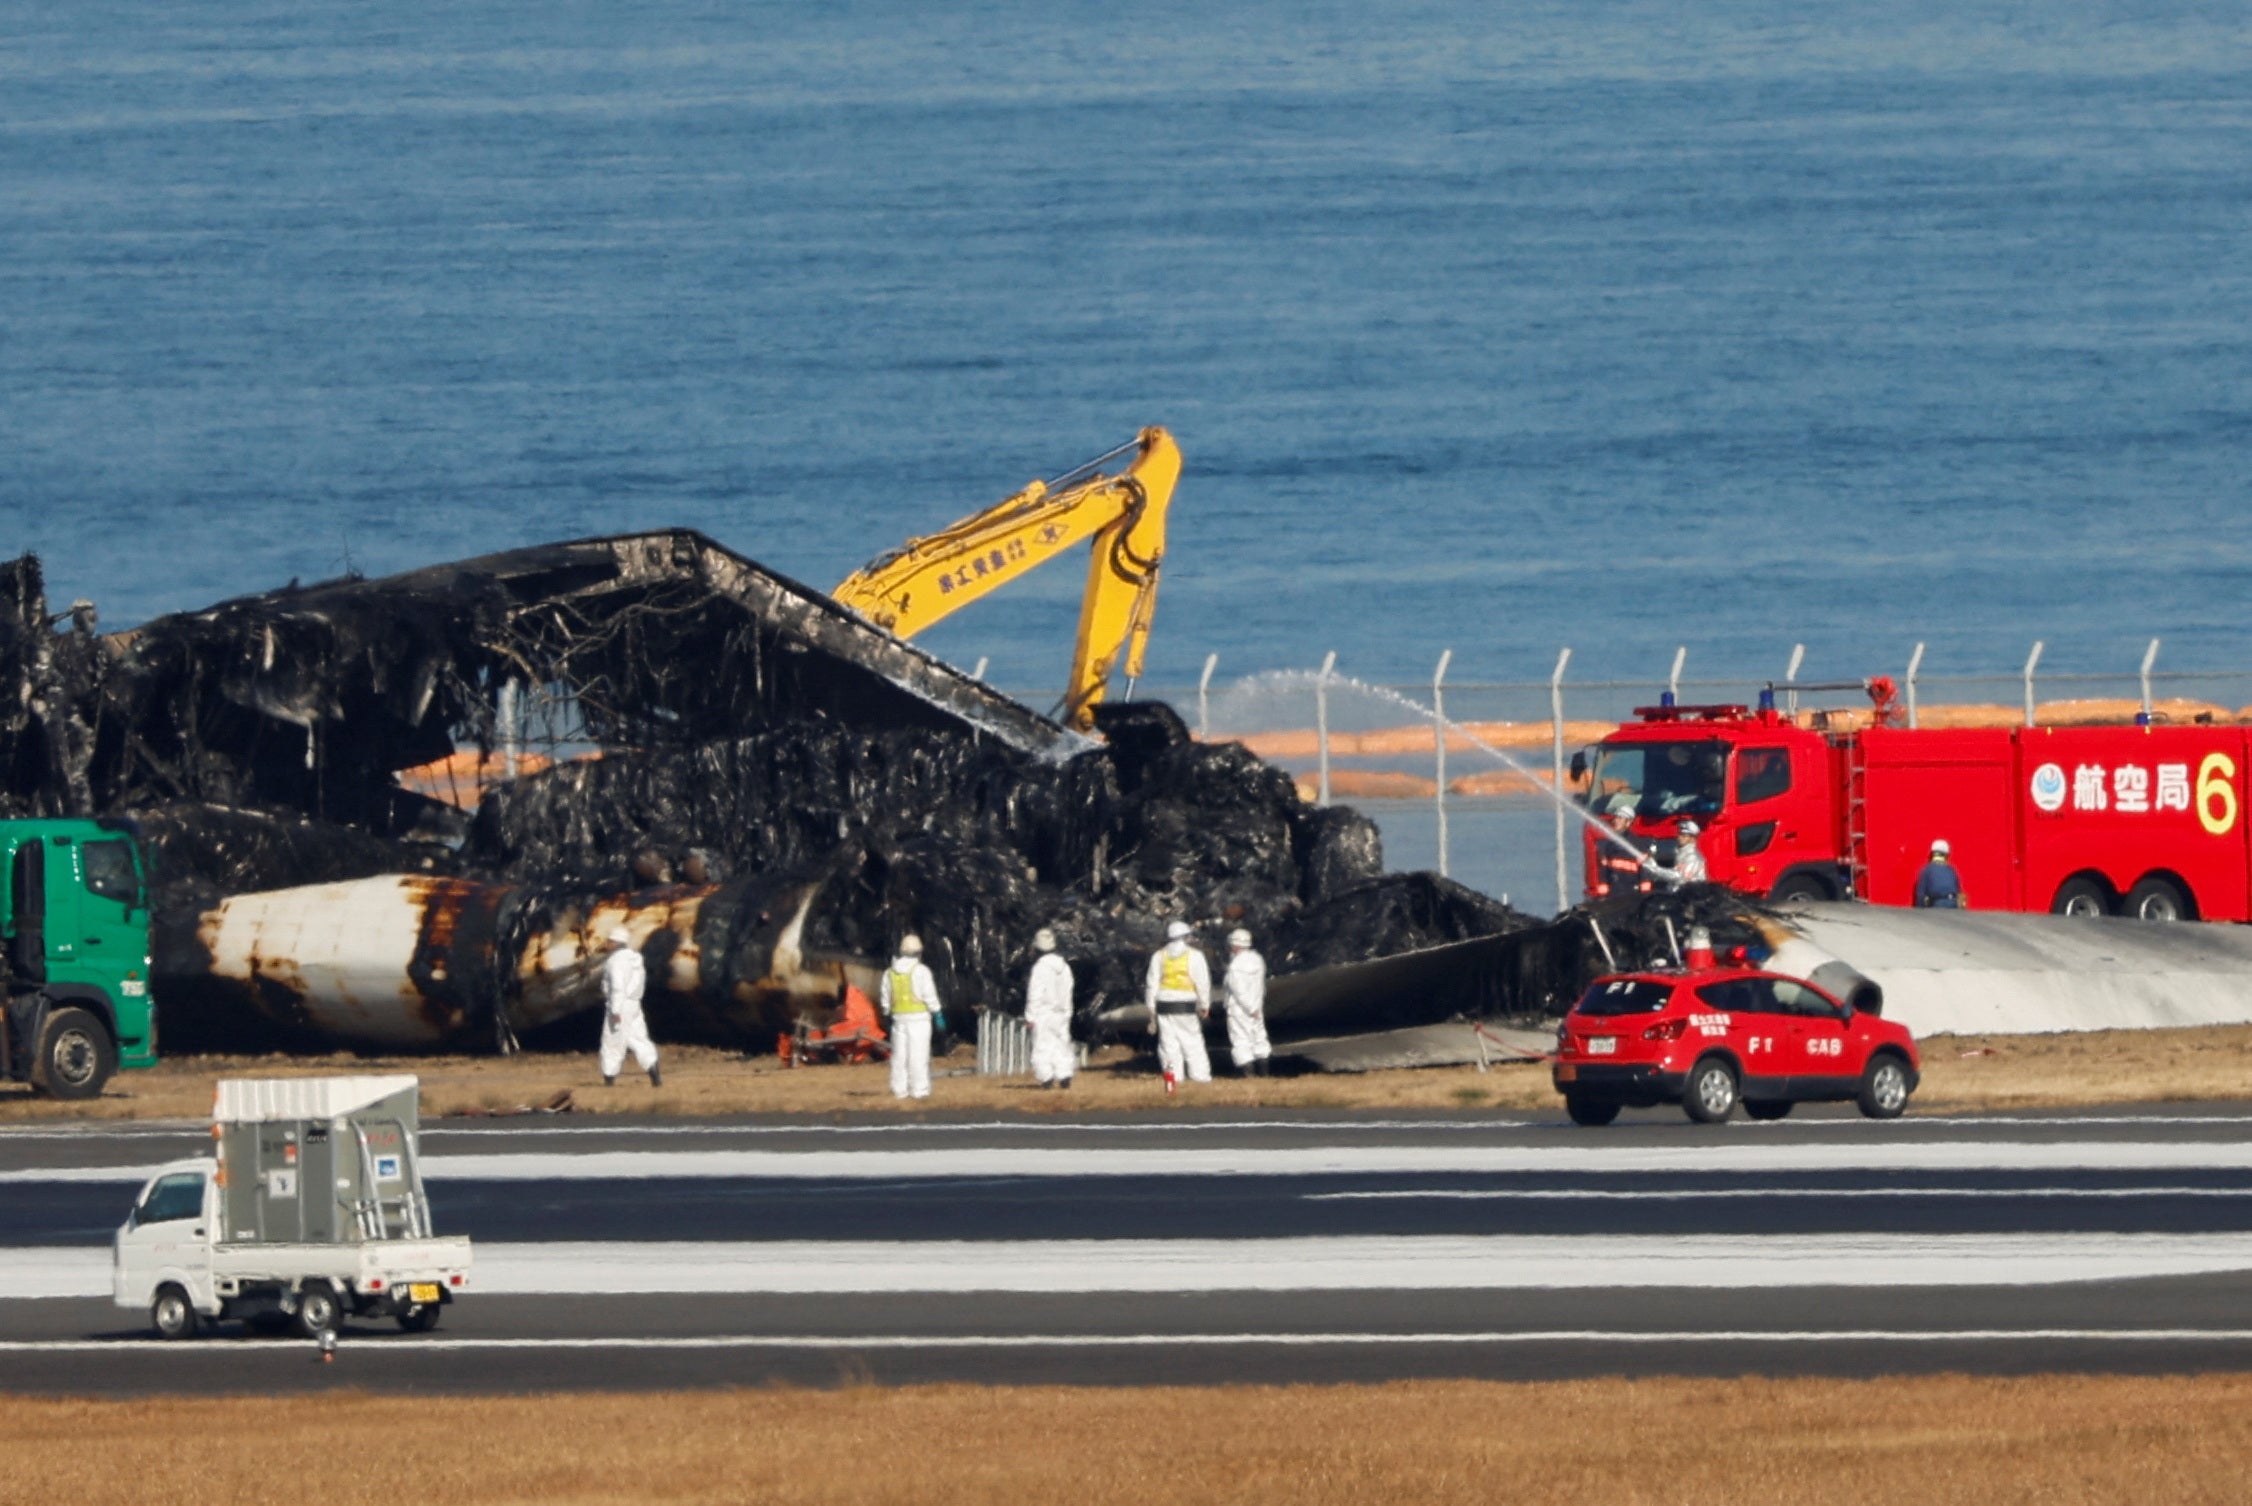 The passenger jet continued for 1km along the runway, in flames and with 367 passengers on board